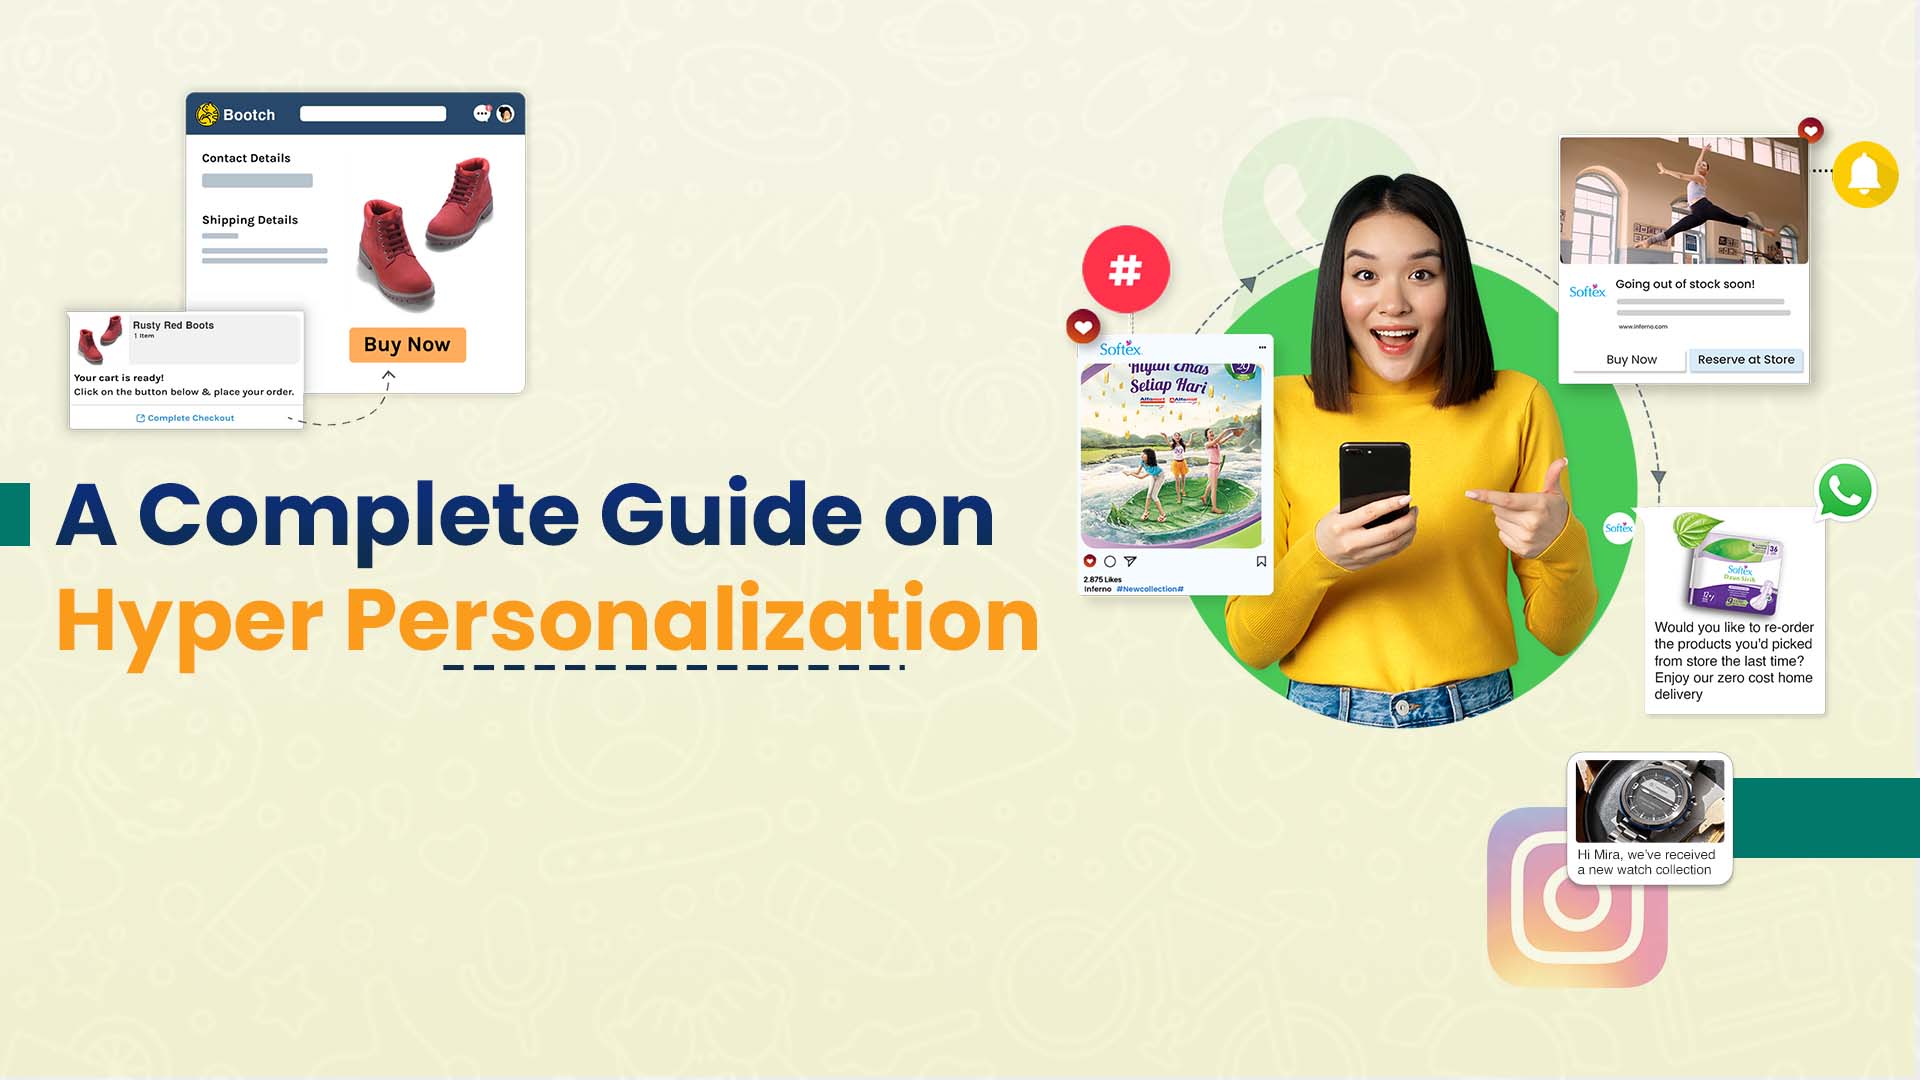 A Complete Guide on Hyper-Personalization